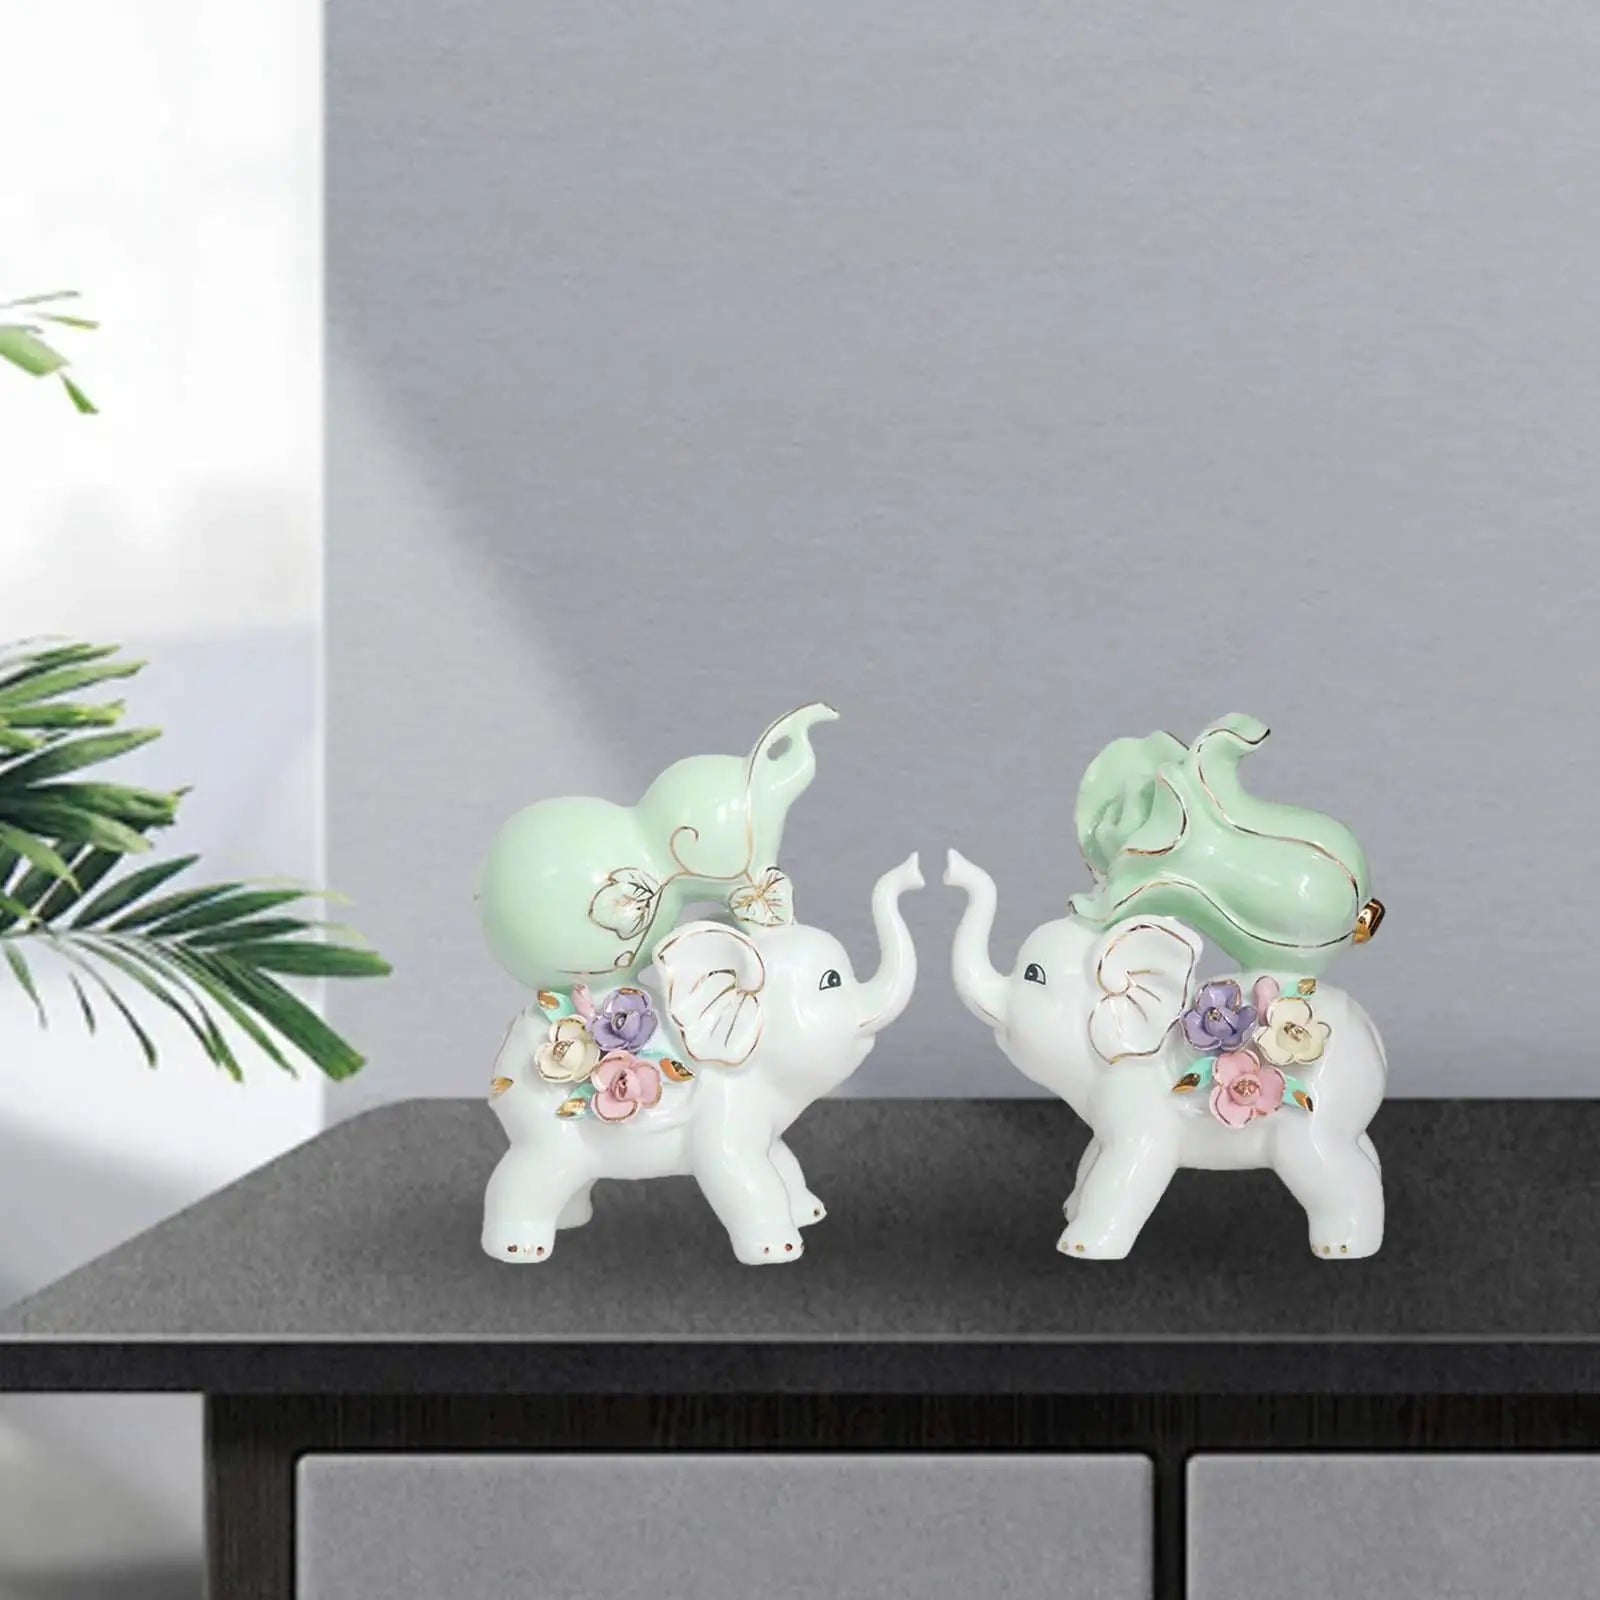 2x Elephant Ornaments Craft Creative Home Decoration Elephant Statue Elephant Decoration Ceramic Sculpture for Home Accent Piece